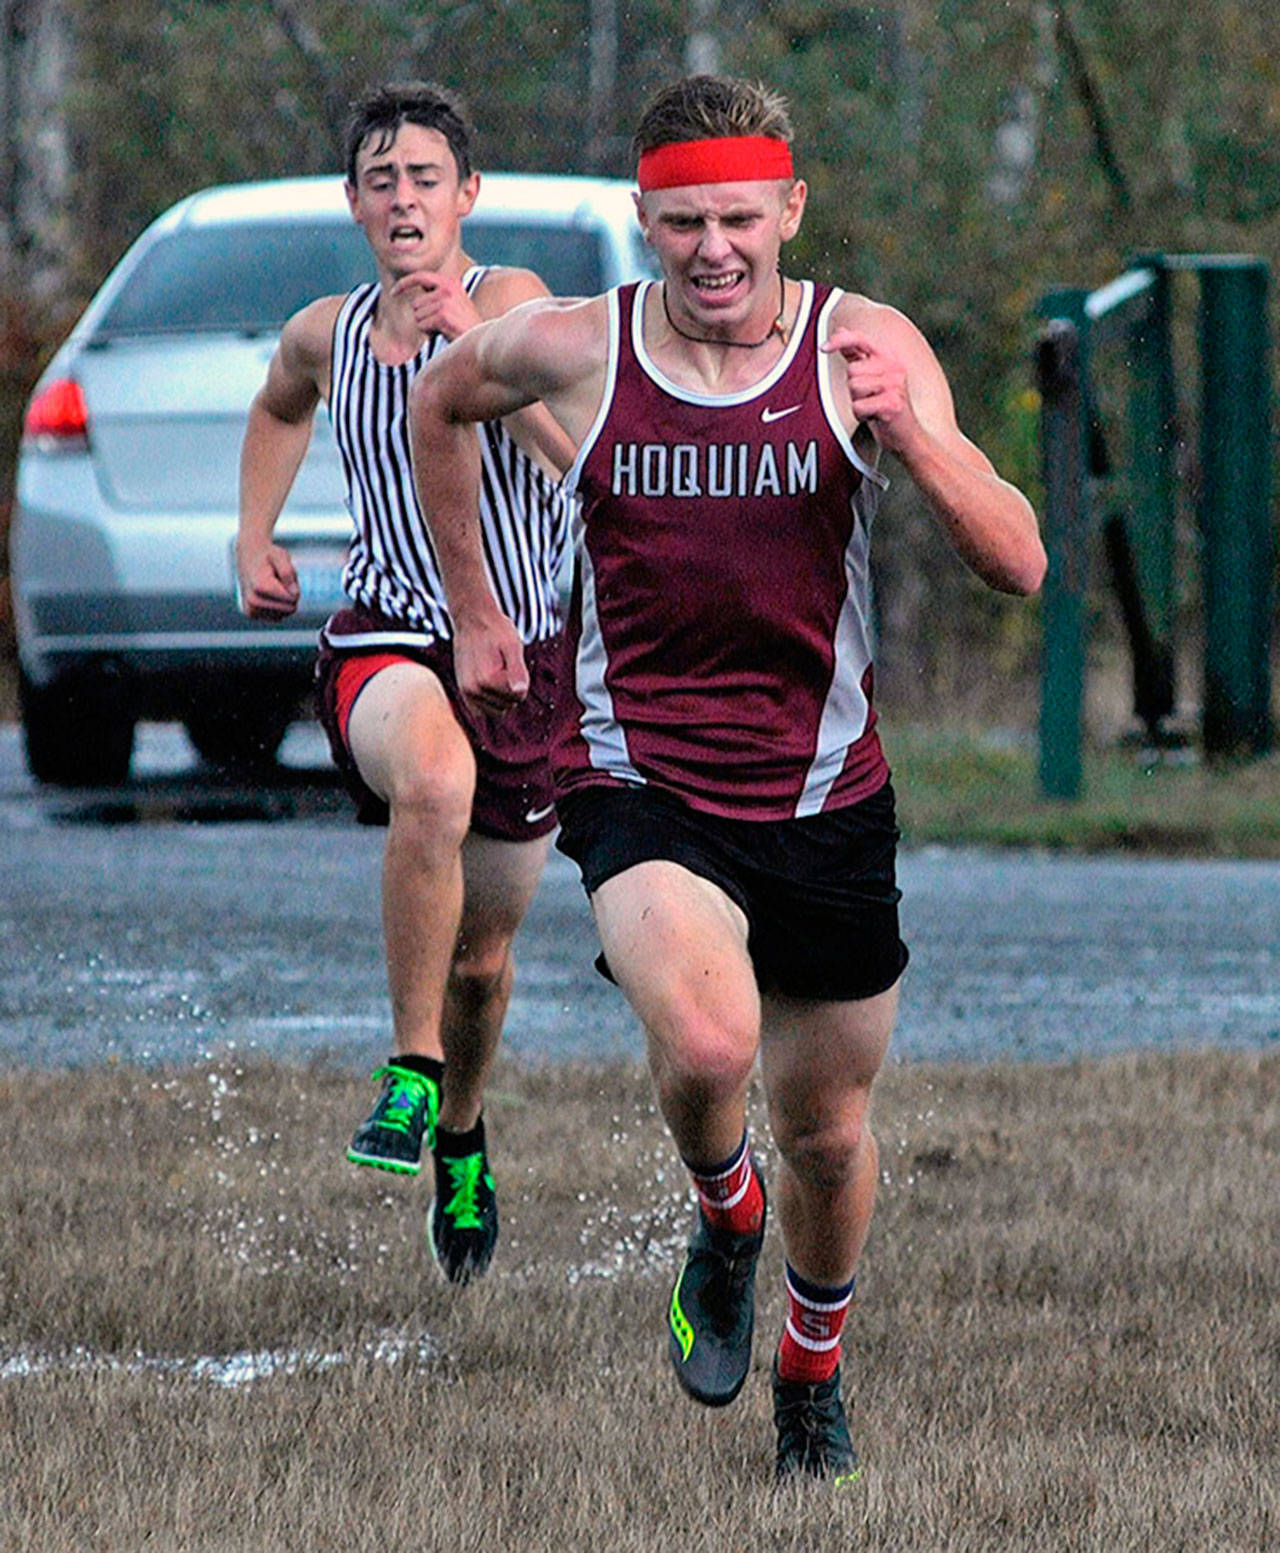 Hoquiam’s Alex Petersen, right, pulls ahead of Montesano’s Martin Shuck at the Elma cross country meet on Thursday. Petersen took second while Shuck finished third. (Hasani Grayson | The Daily World)